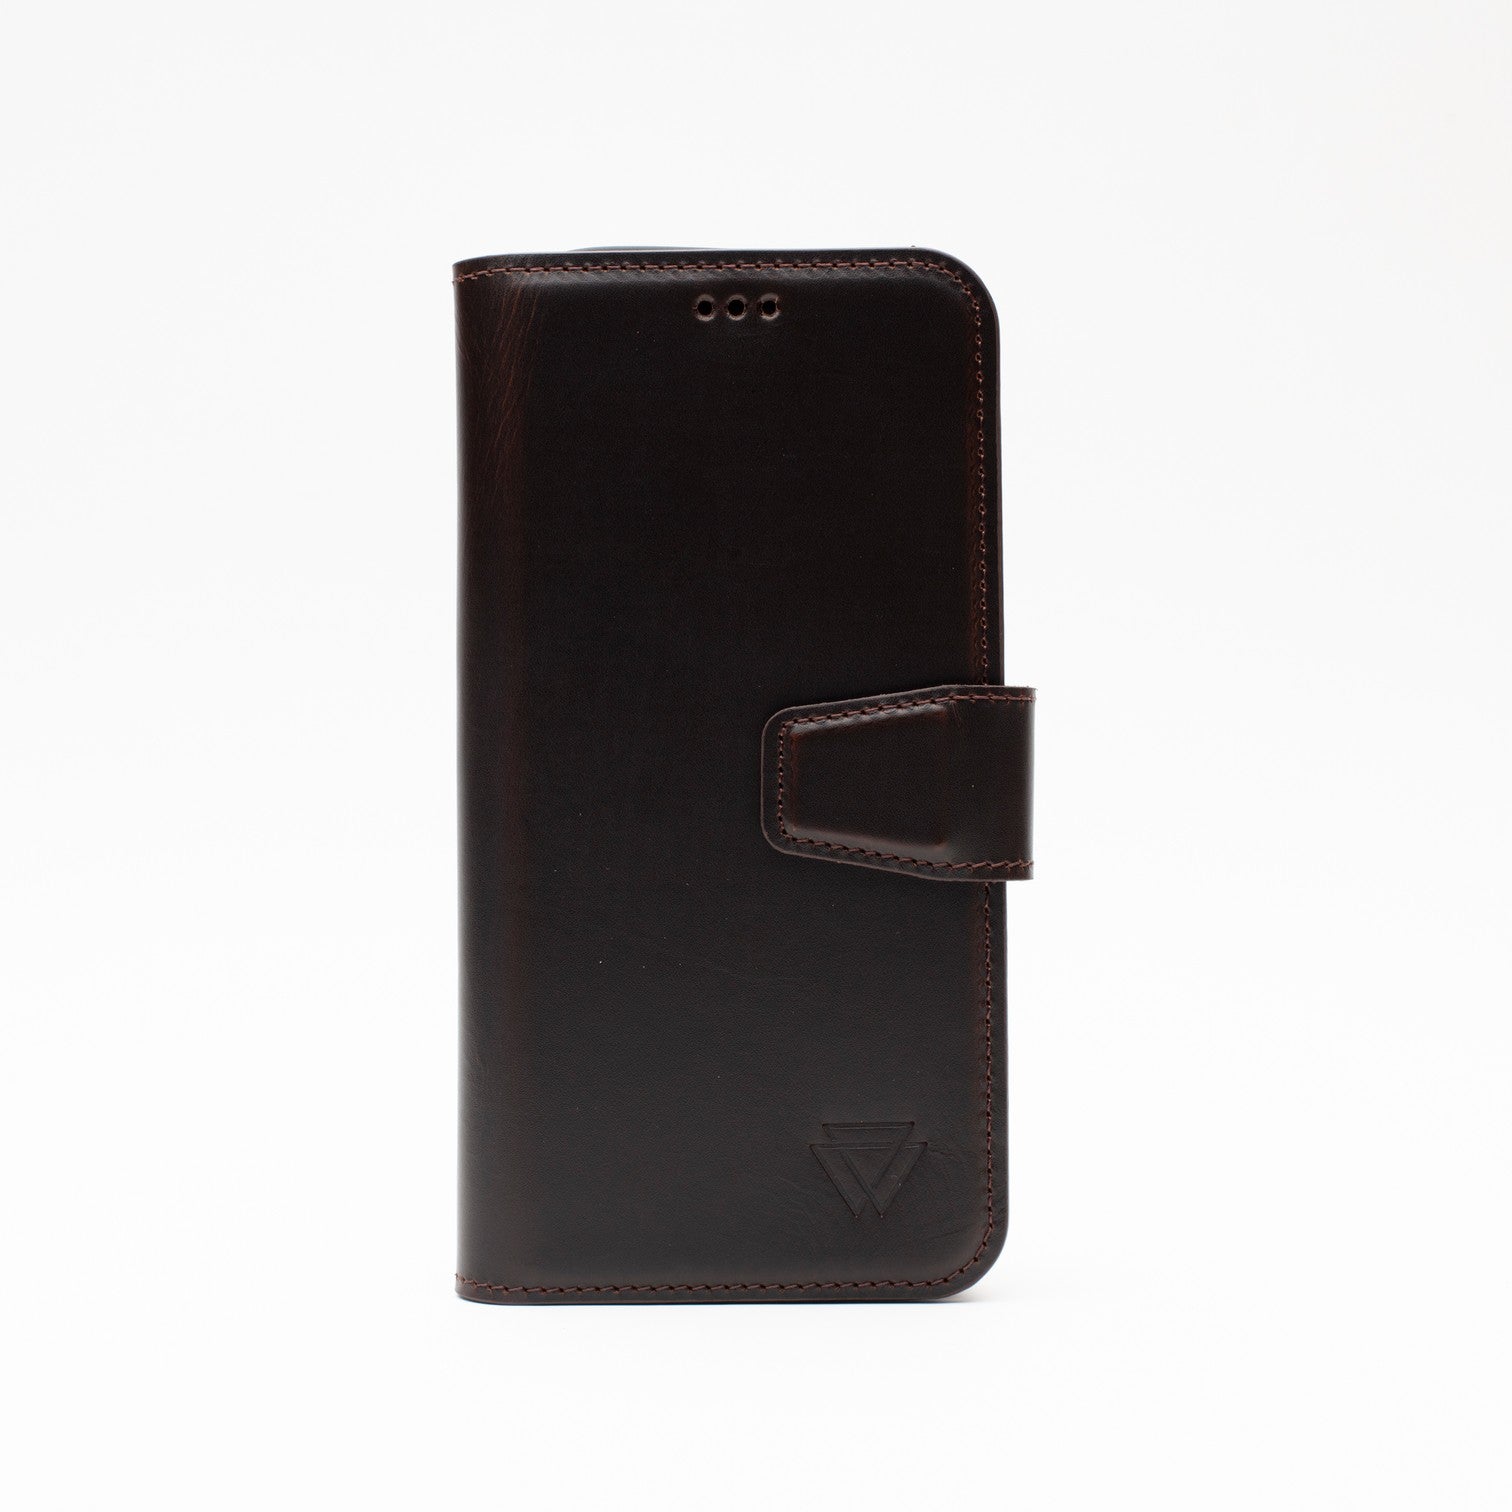 Wachikopa leather Classic iPhone Case for iPhone 12 Pro Max Dark Brown